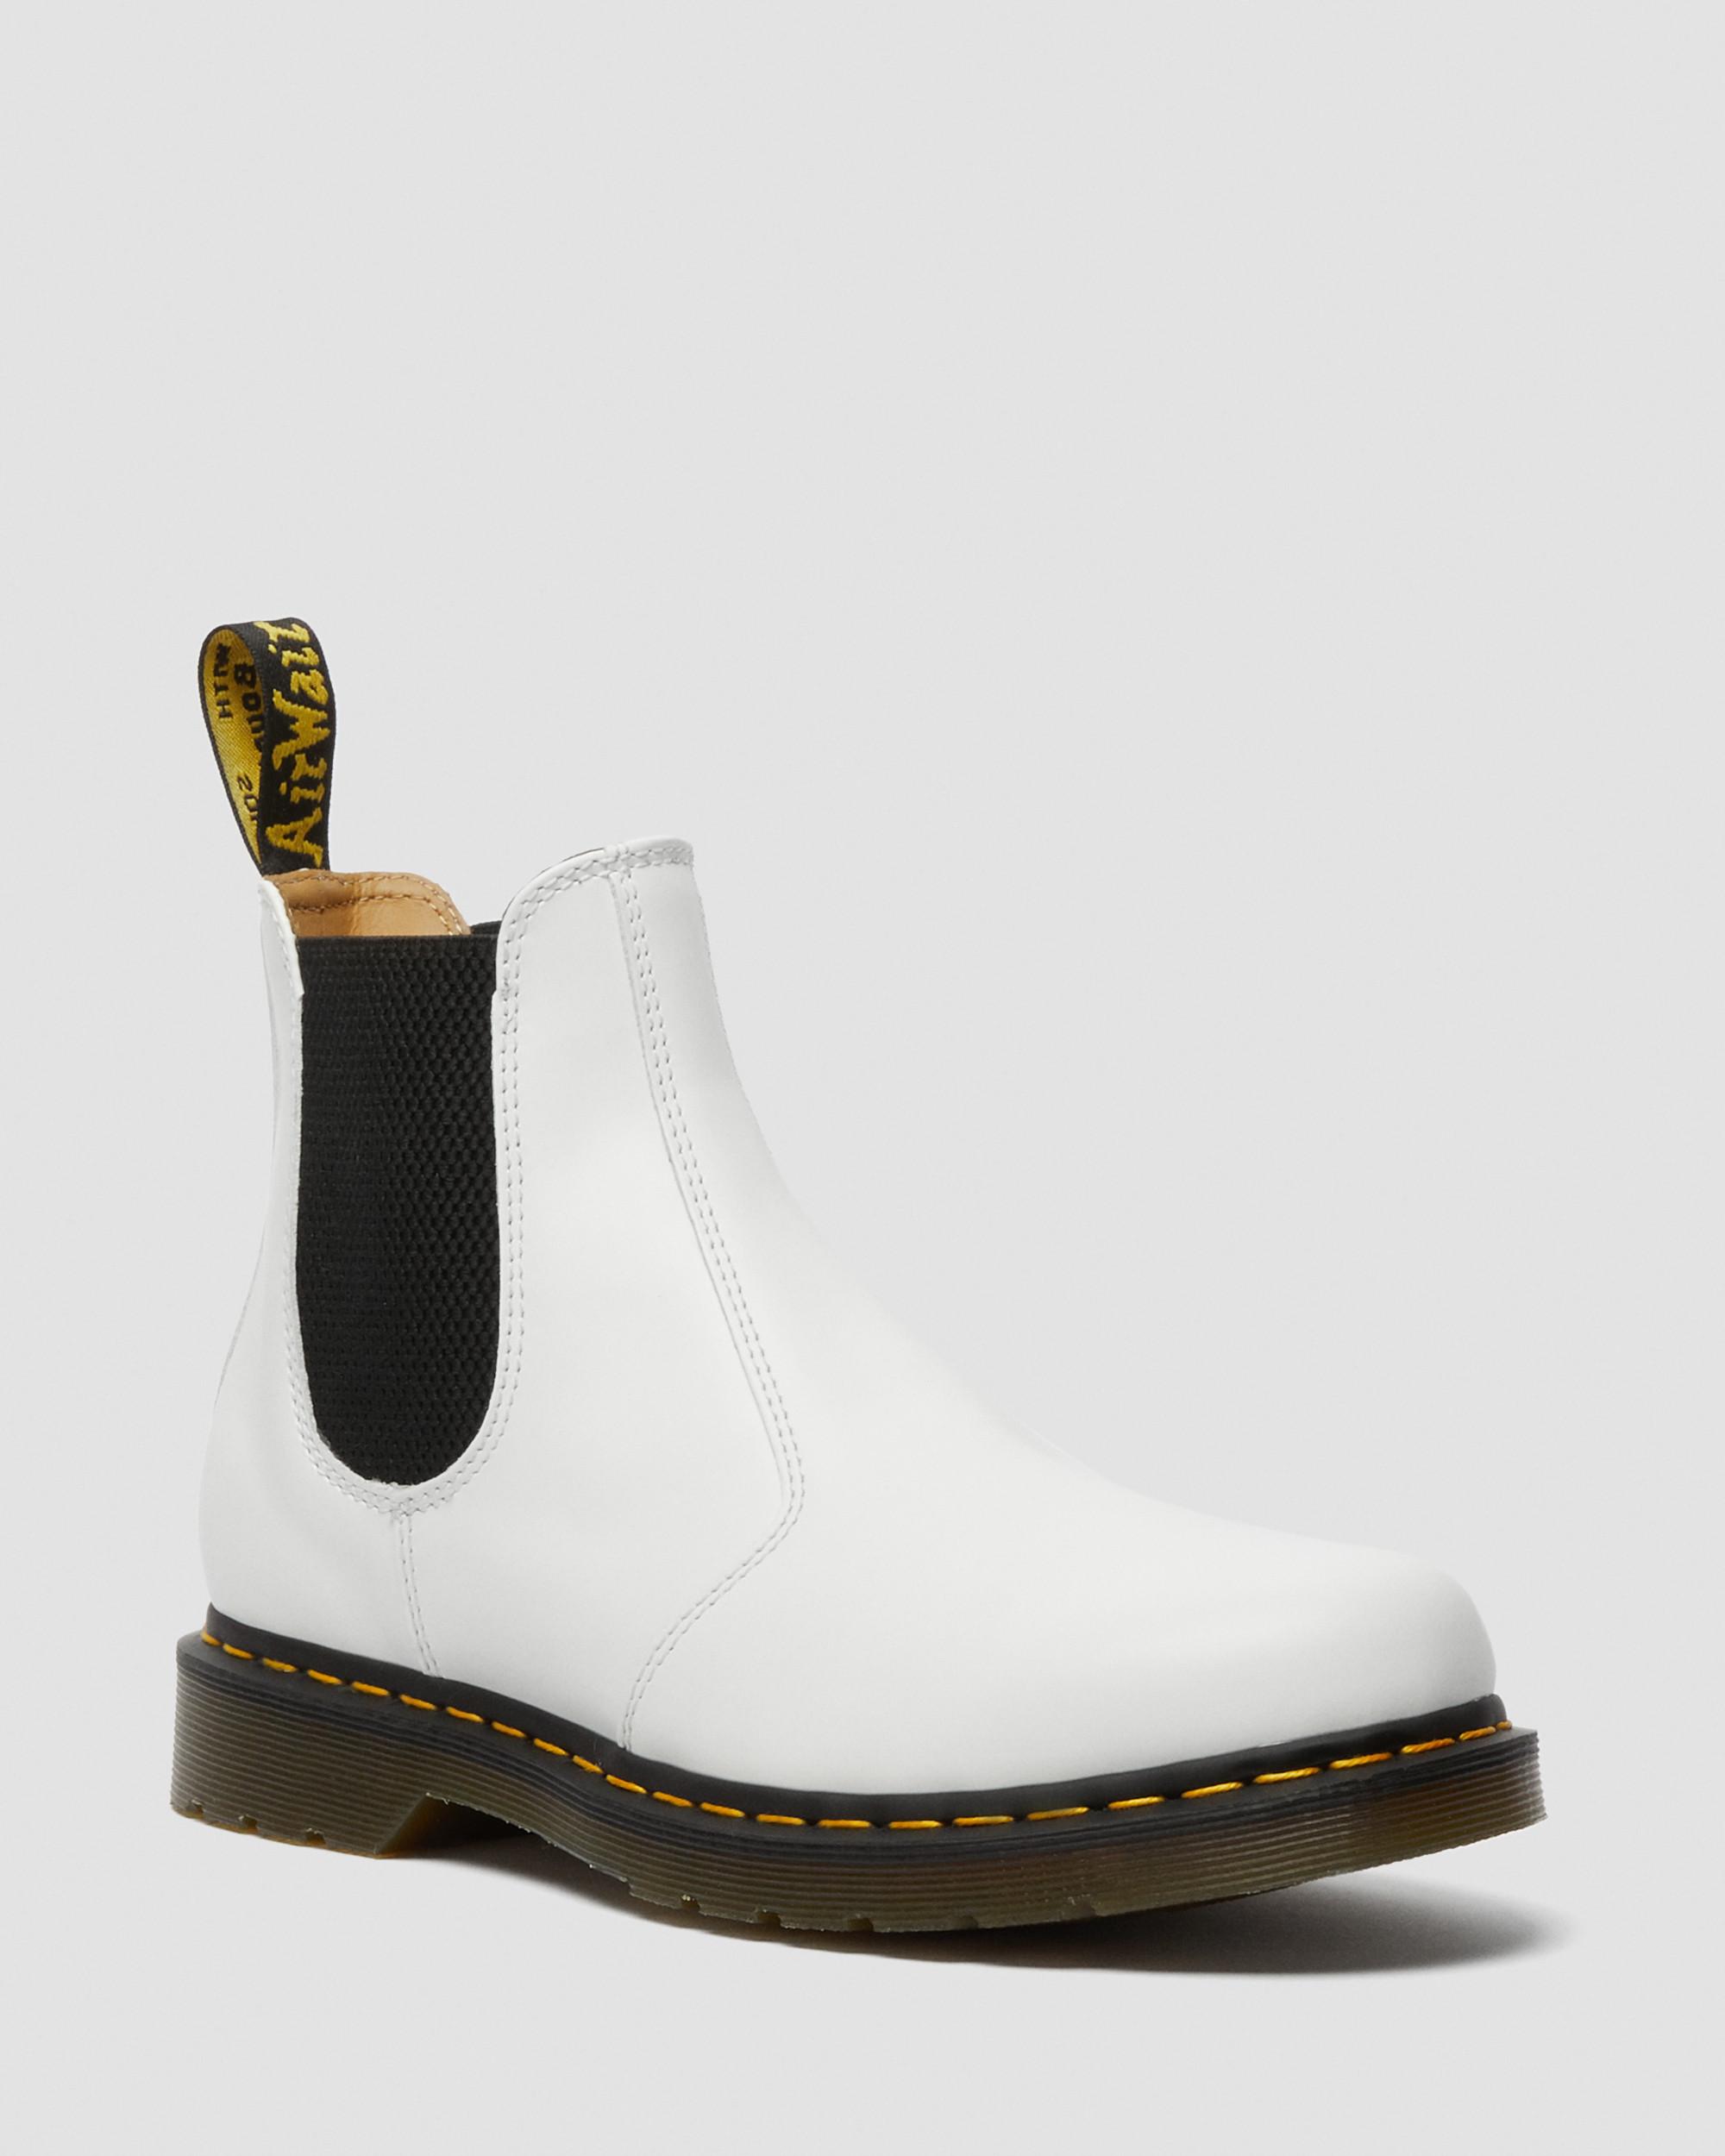 Indtil Thorns privilegeret 2976 Yellow Stitch Smooth Leather Chelsea Boots | Dr. Martens